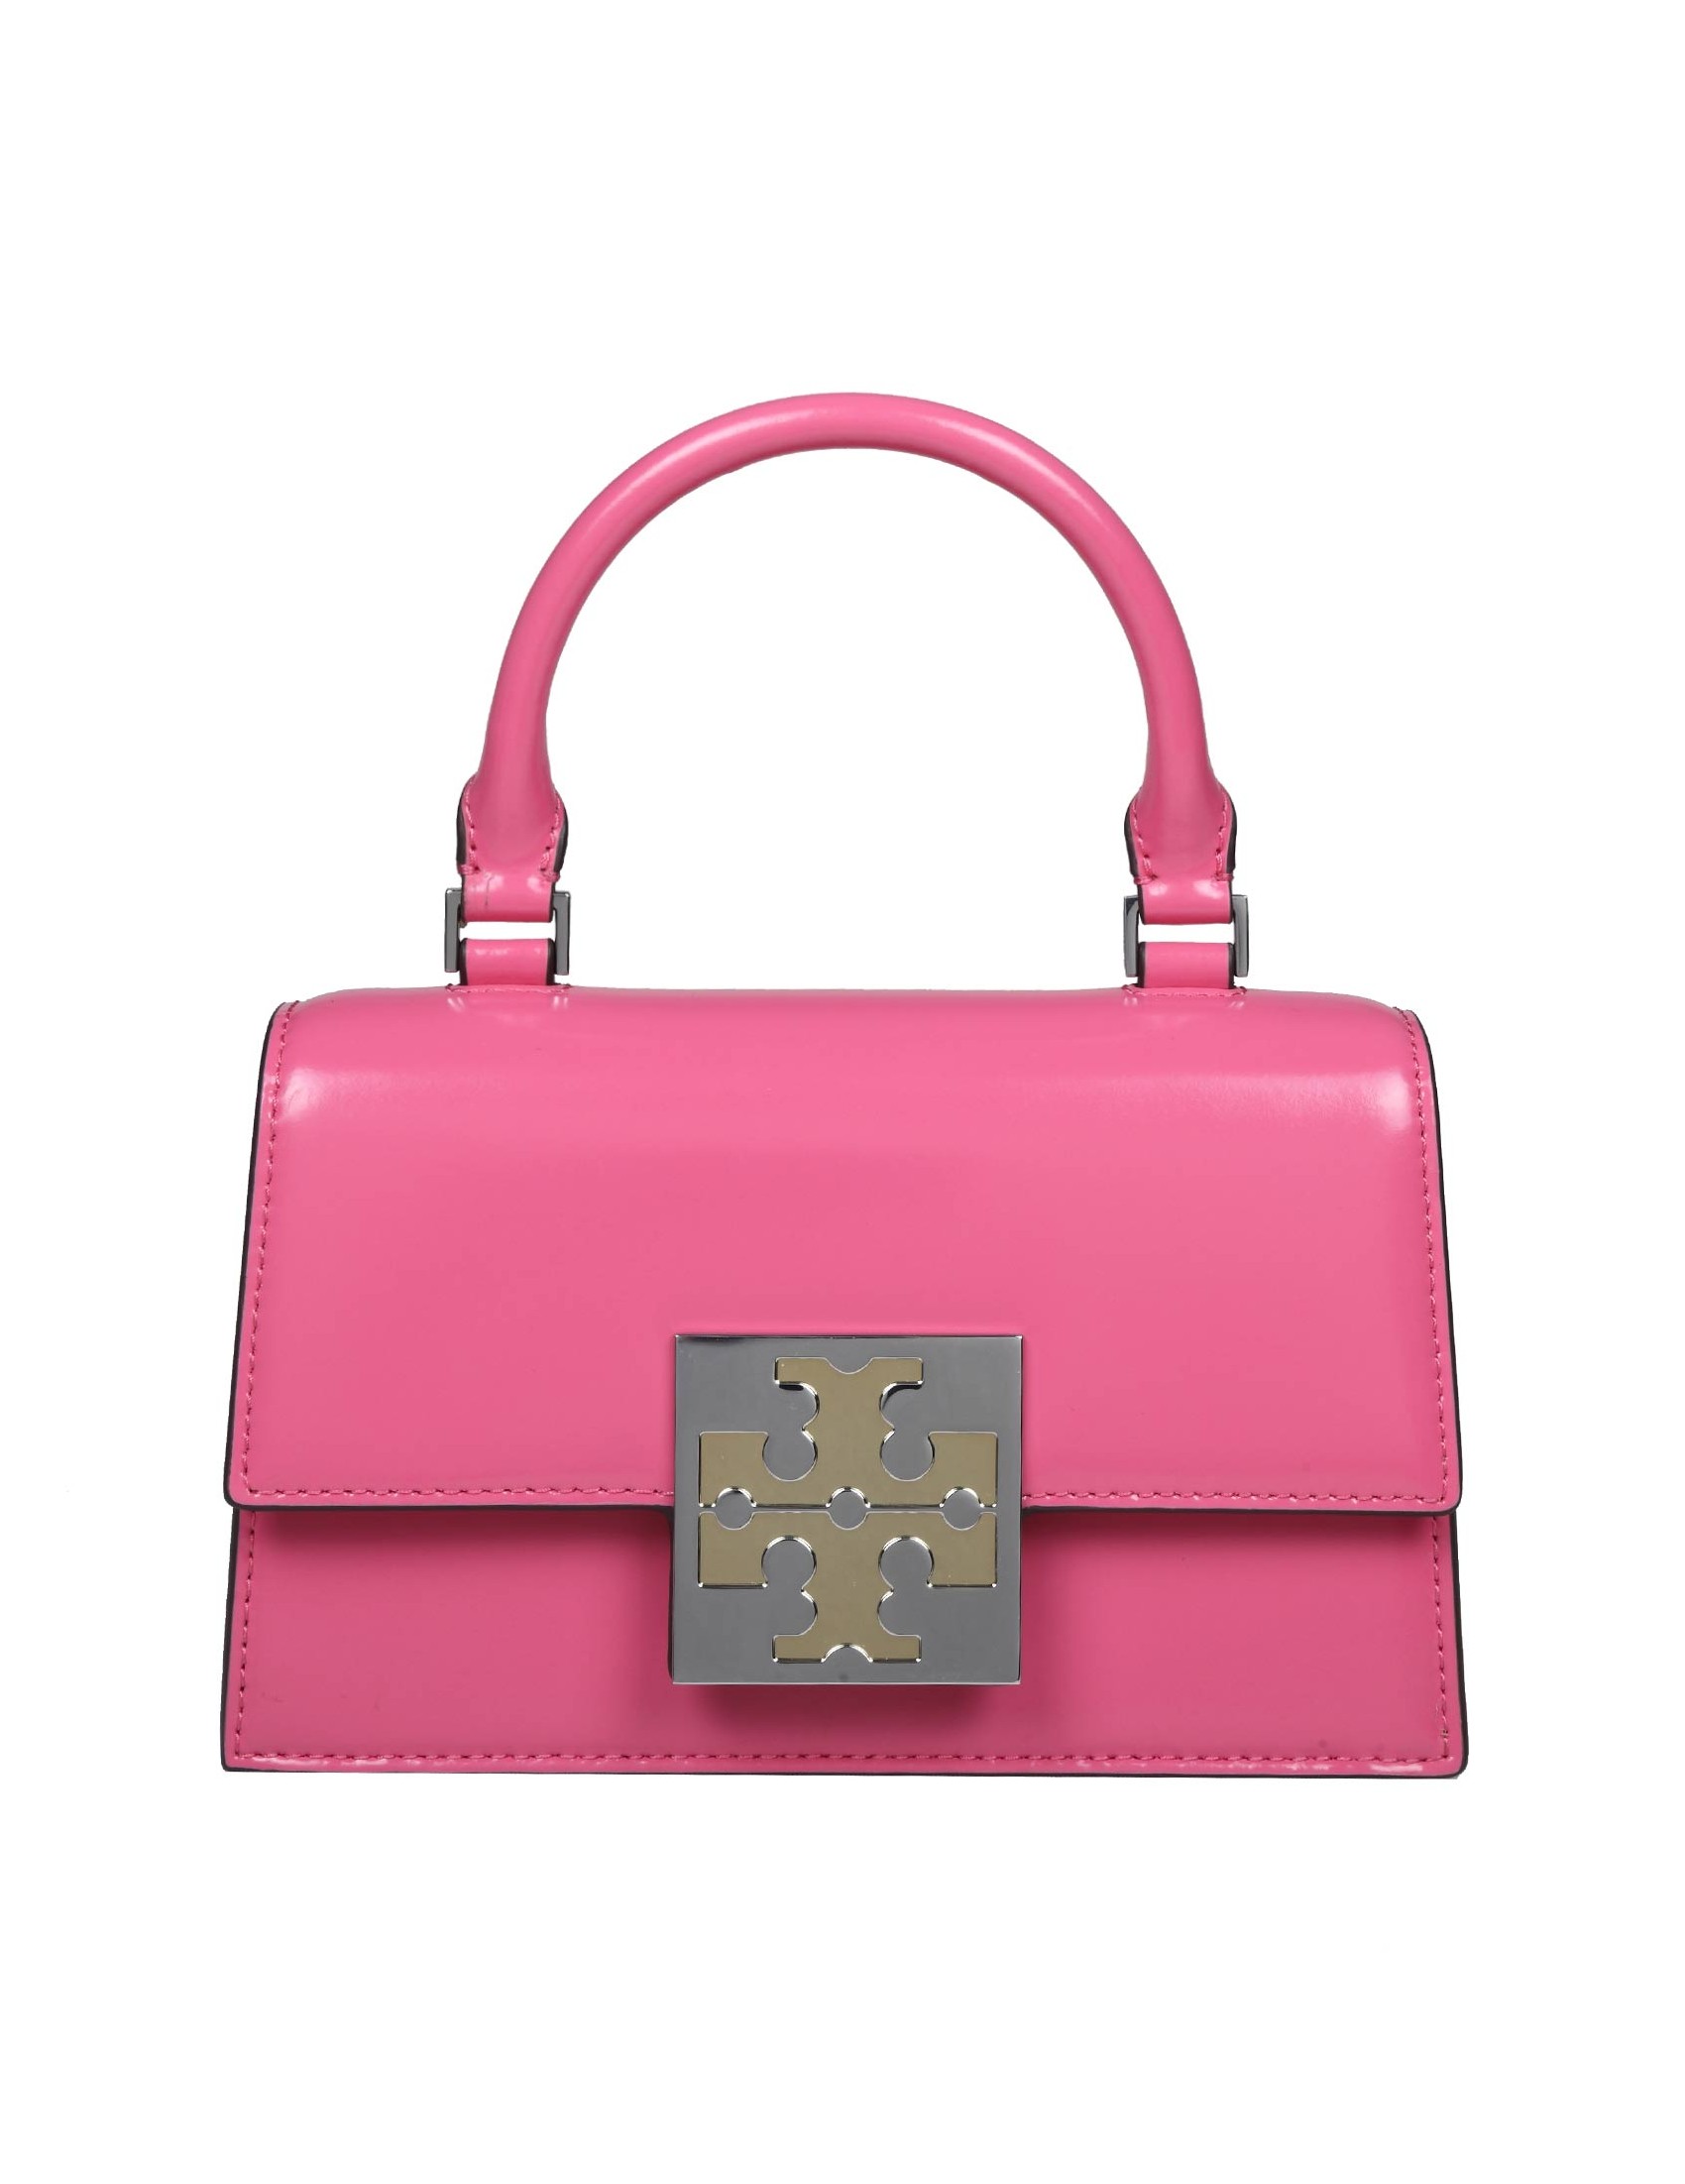 TORY BURCH MINI TOP HANDLE BAG IN PINK LEATHER